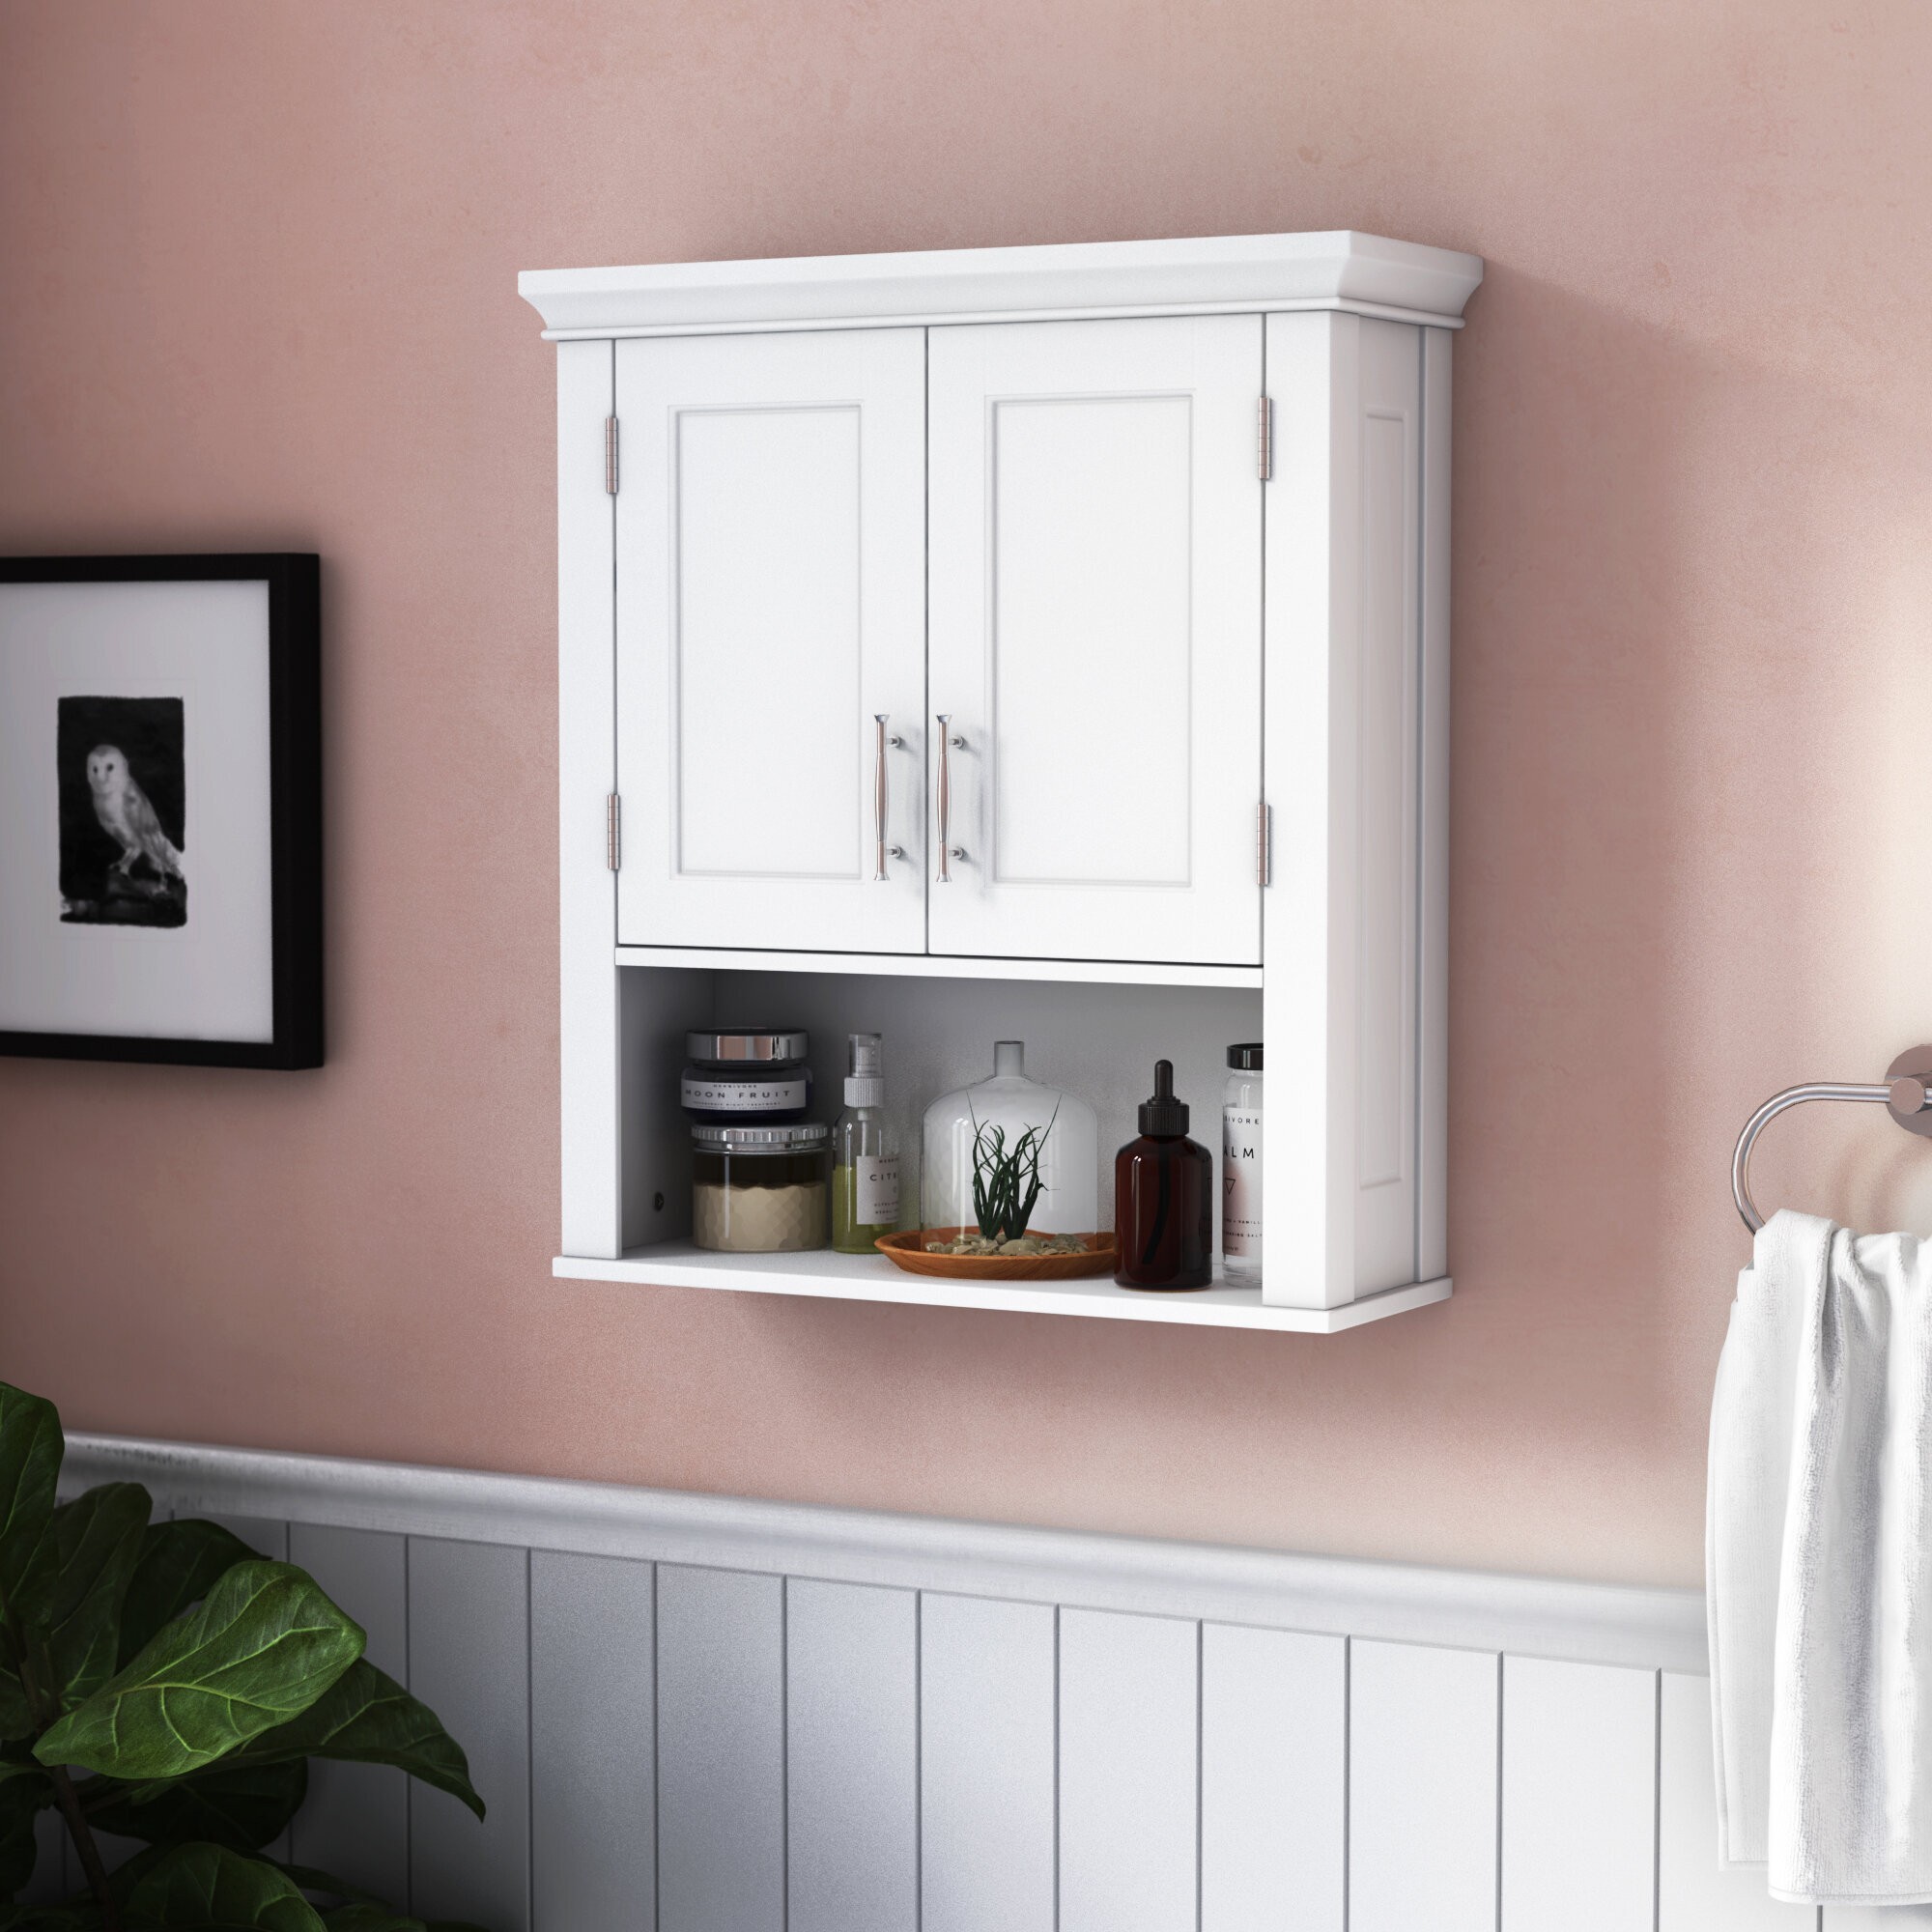 How To Choose Wall-Mounted Storage - Foter